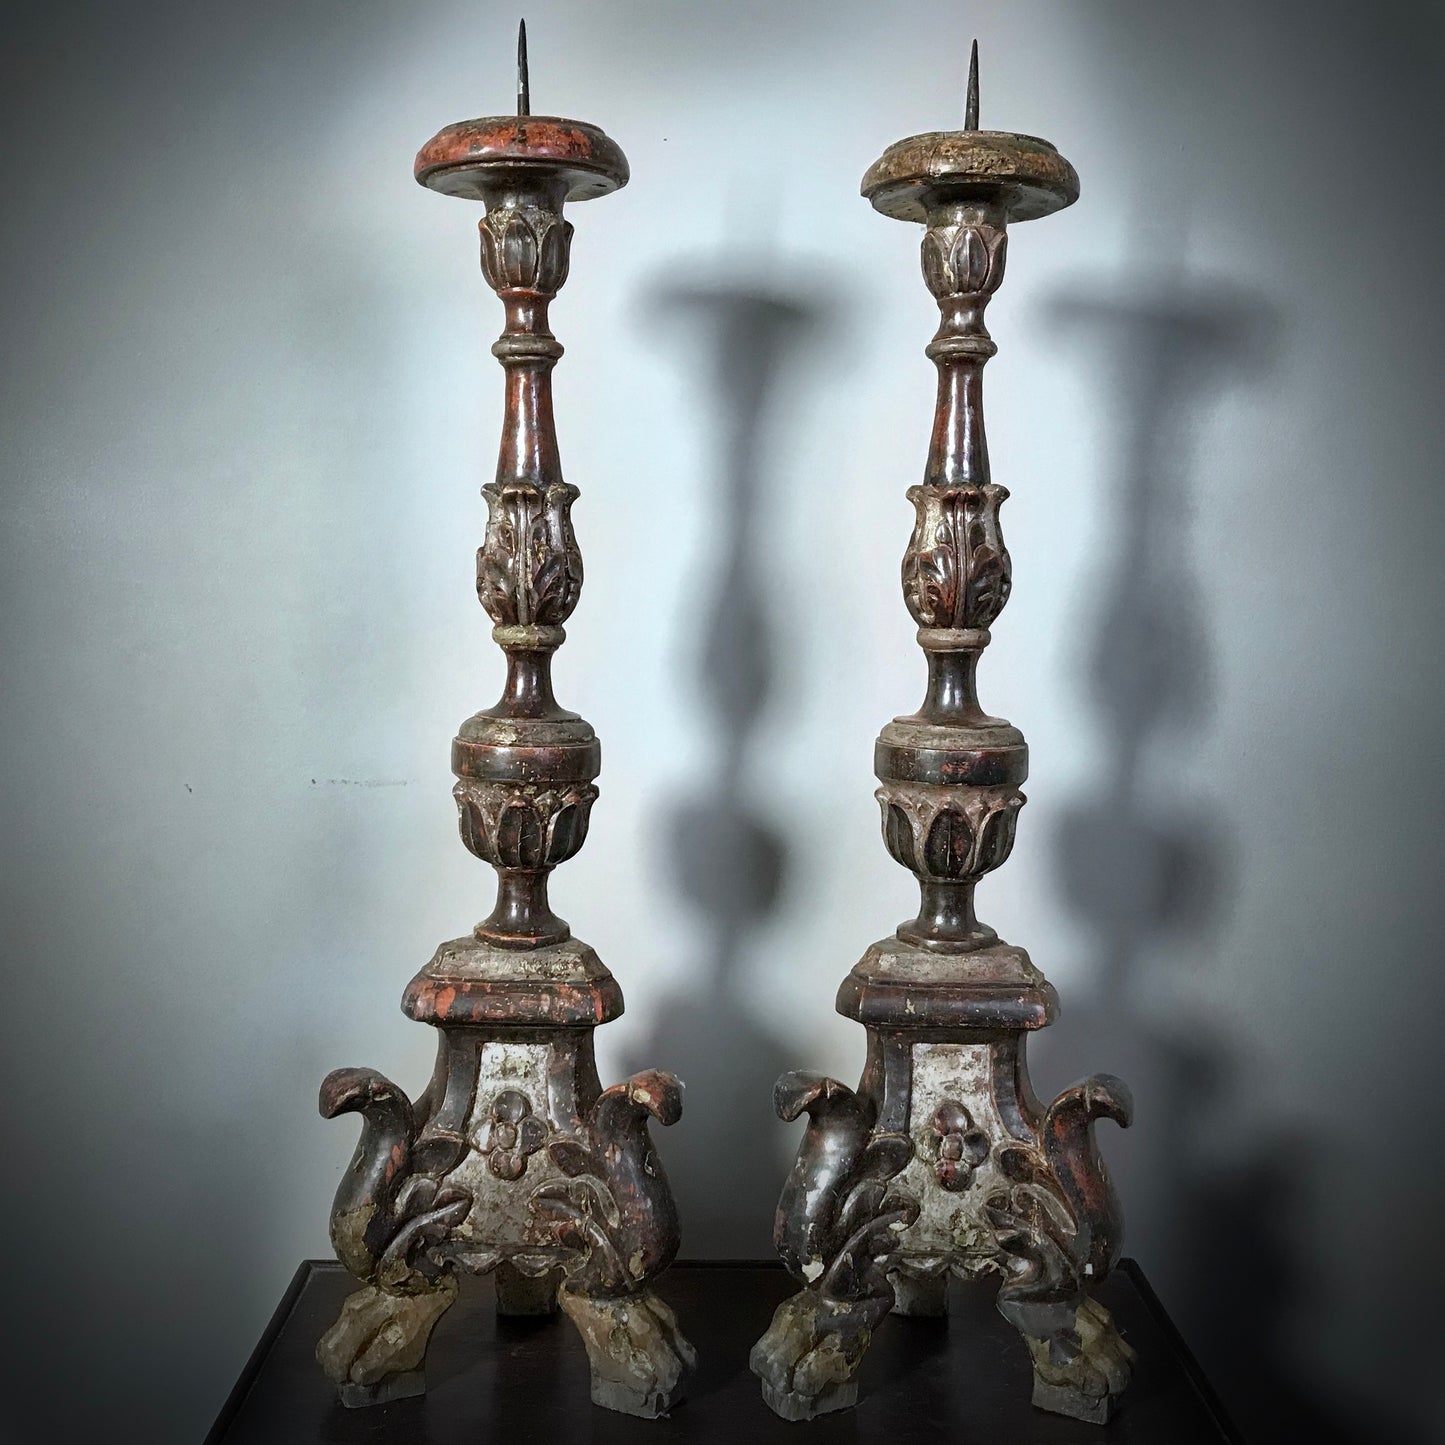 Pair of Early Italian Candlesticks